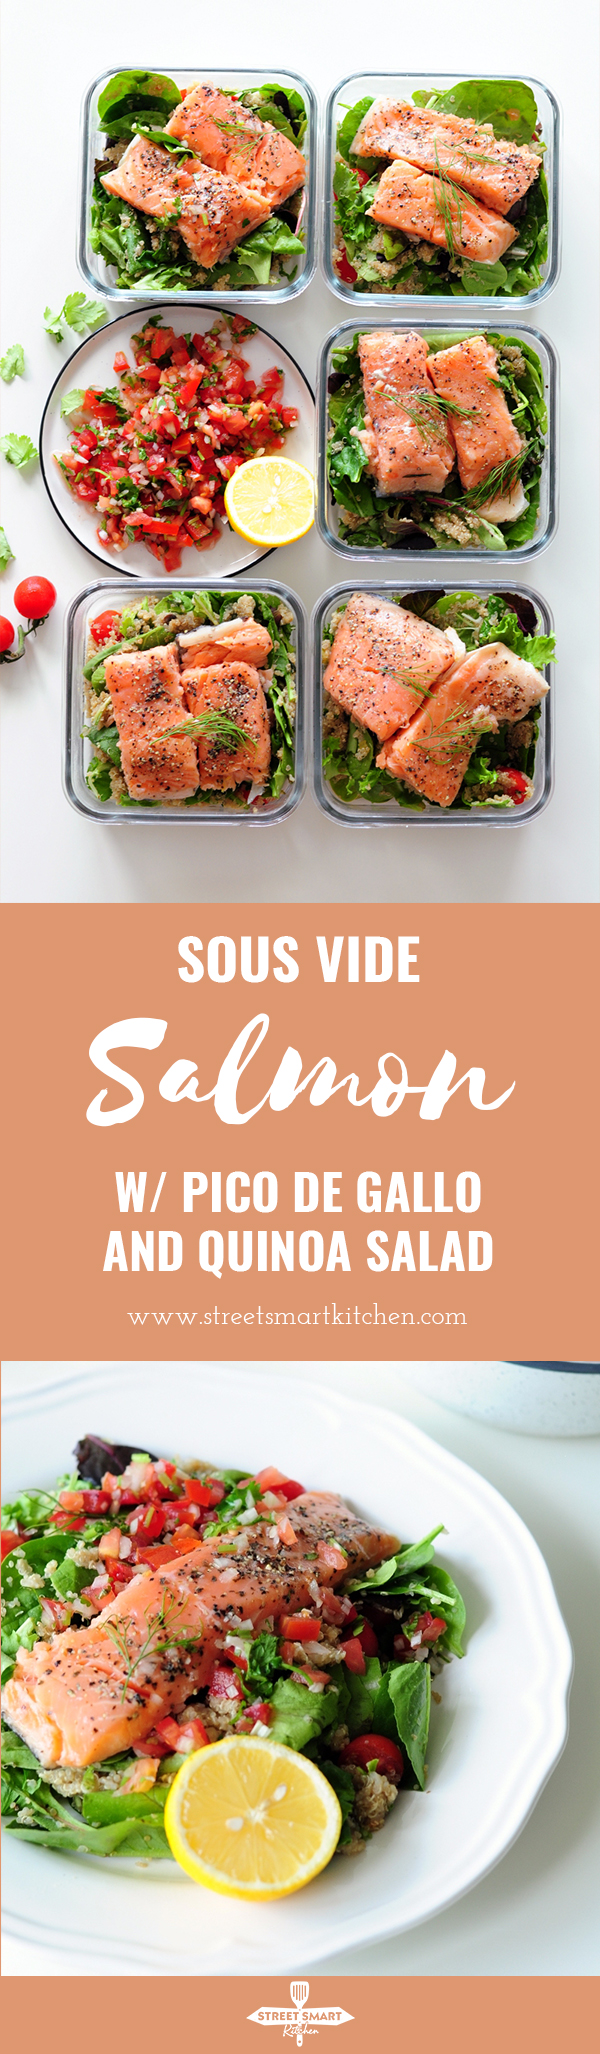 Sous vide salmon fillets with crispy skin paired with classic pico de gallo and a simple quinoa salad, this healthy and delicious meal is loaded with protein, omega-3 fatty acids, and vitamins.